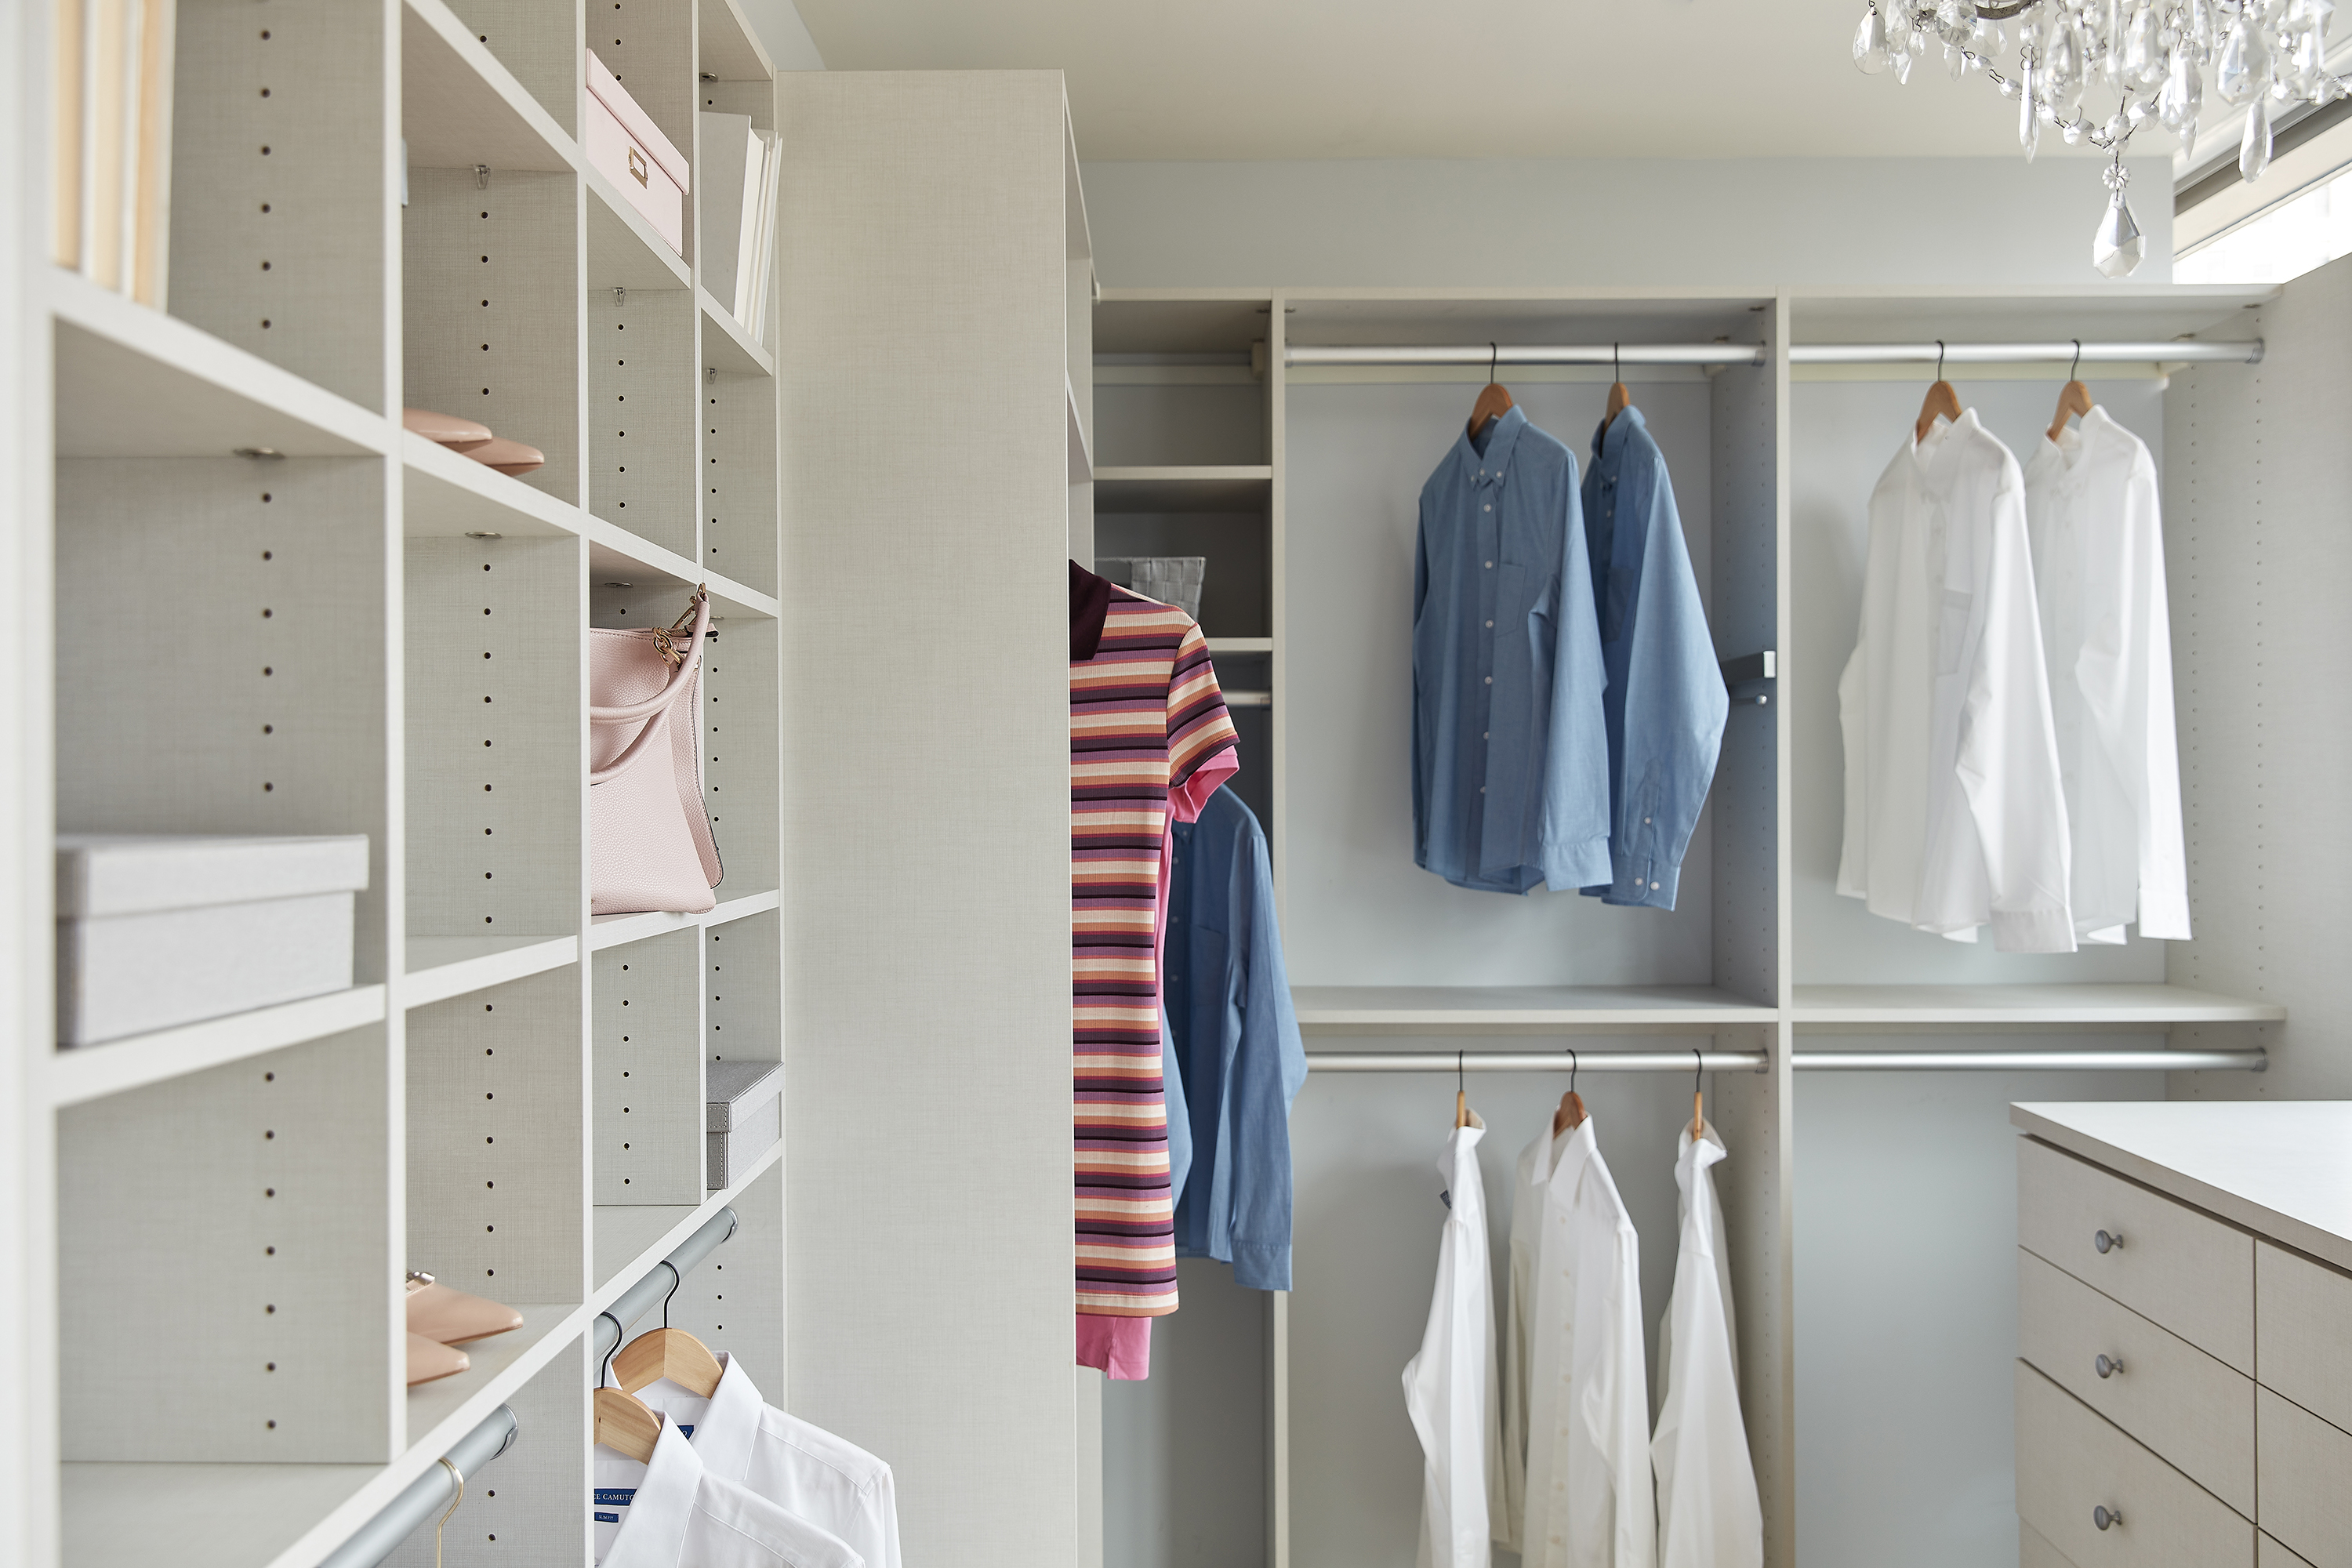 Built-in organization including a built-in dresser helps keep a primary bedroom closet organized.